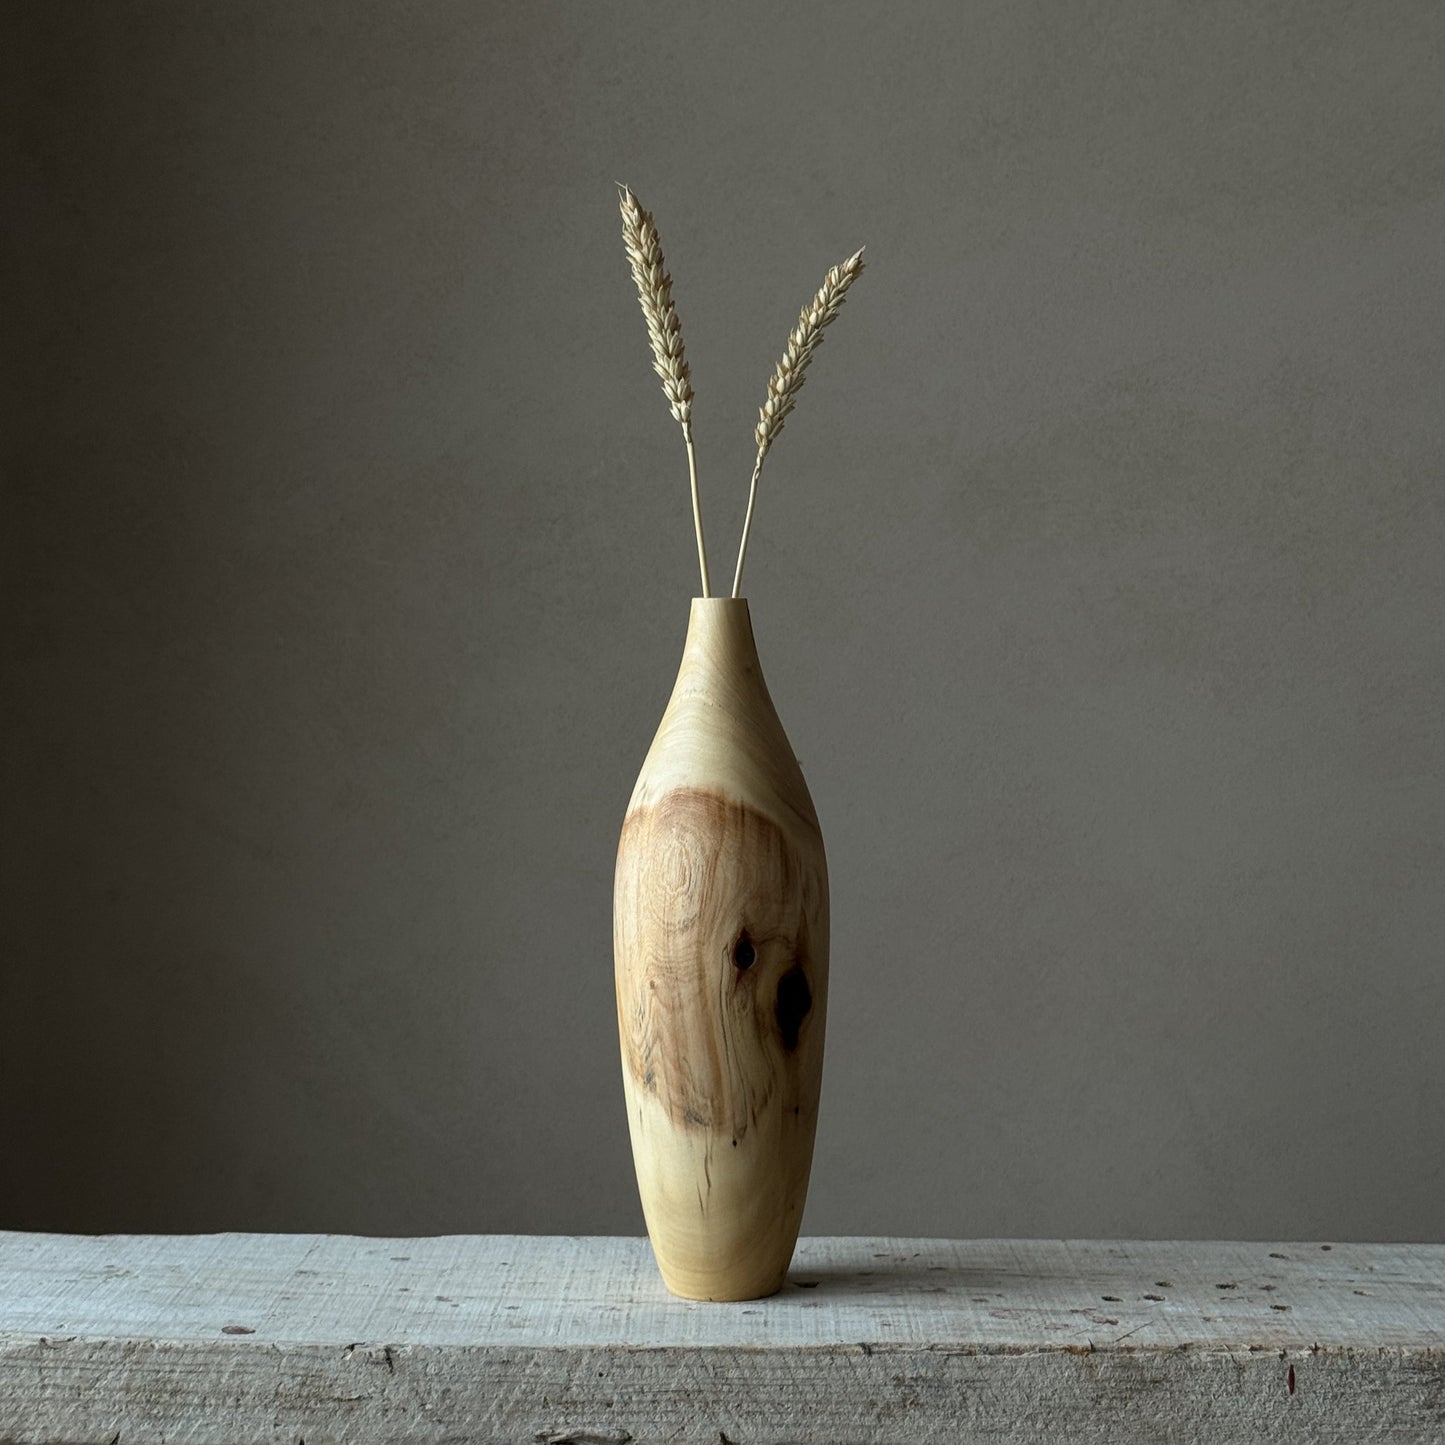 NEW - "In nature nothing is created, nothing is lost; everything is transformed" | Vase